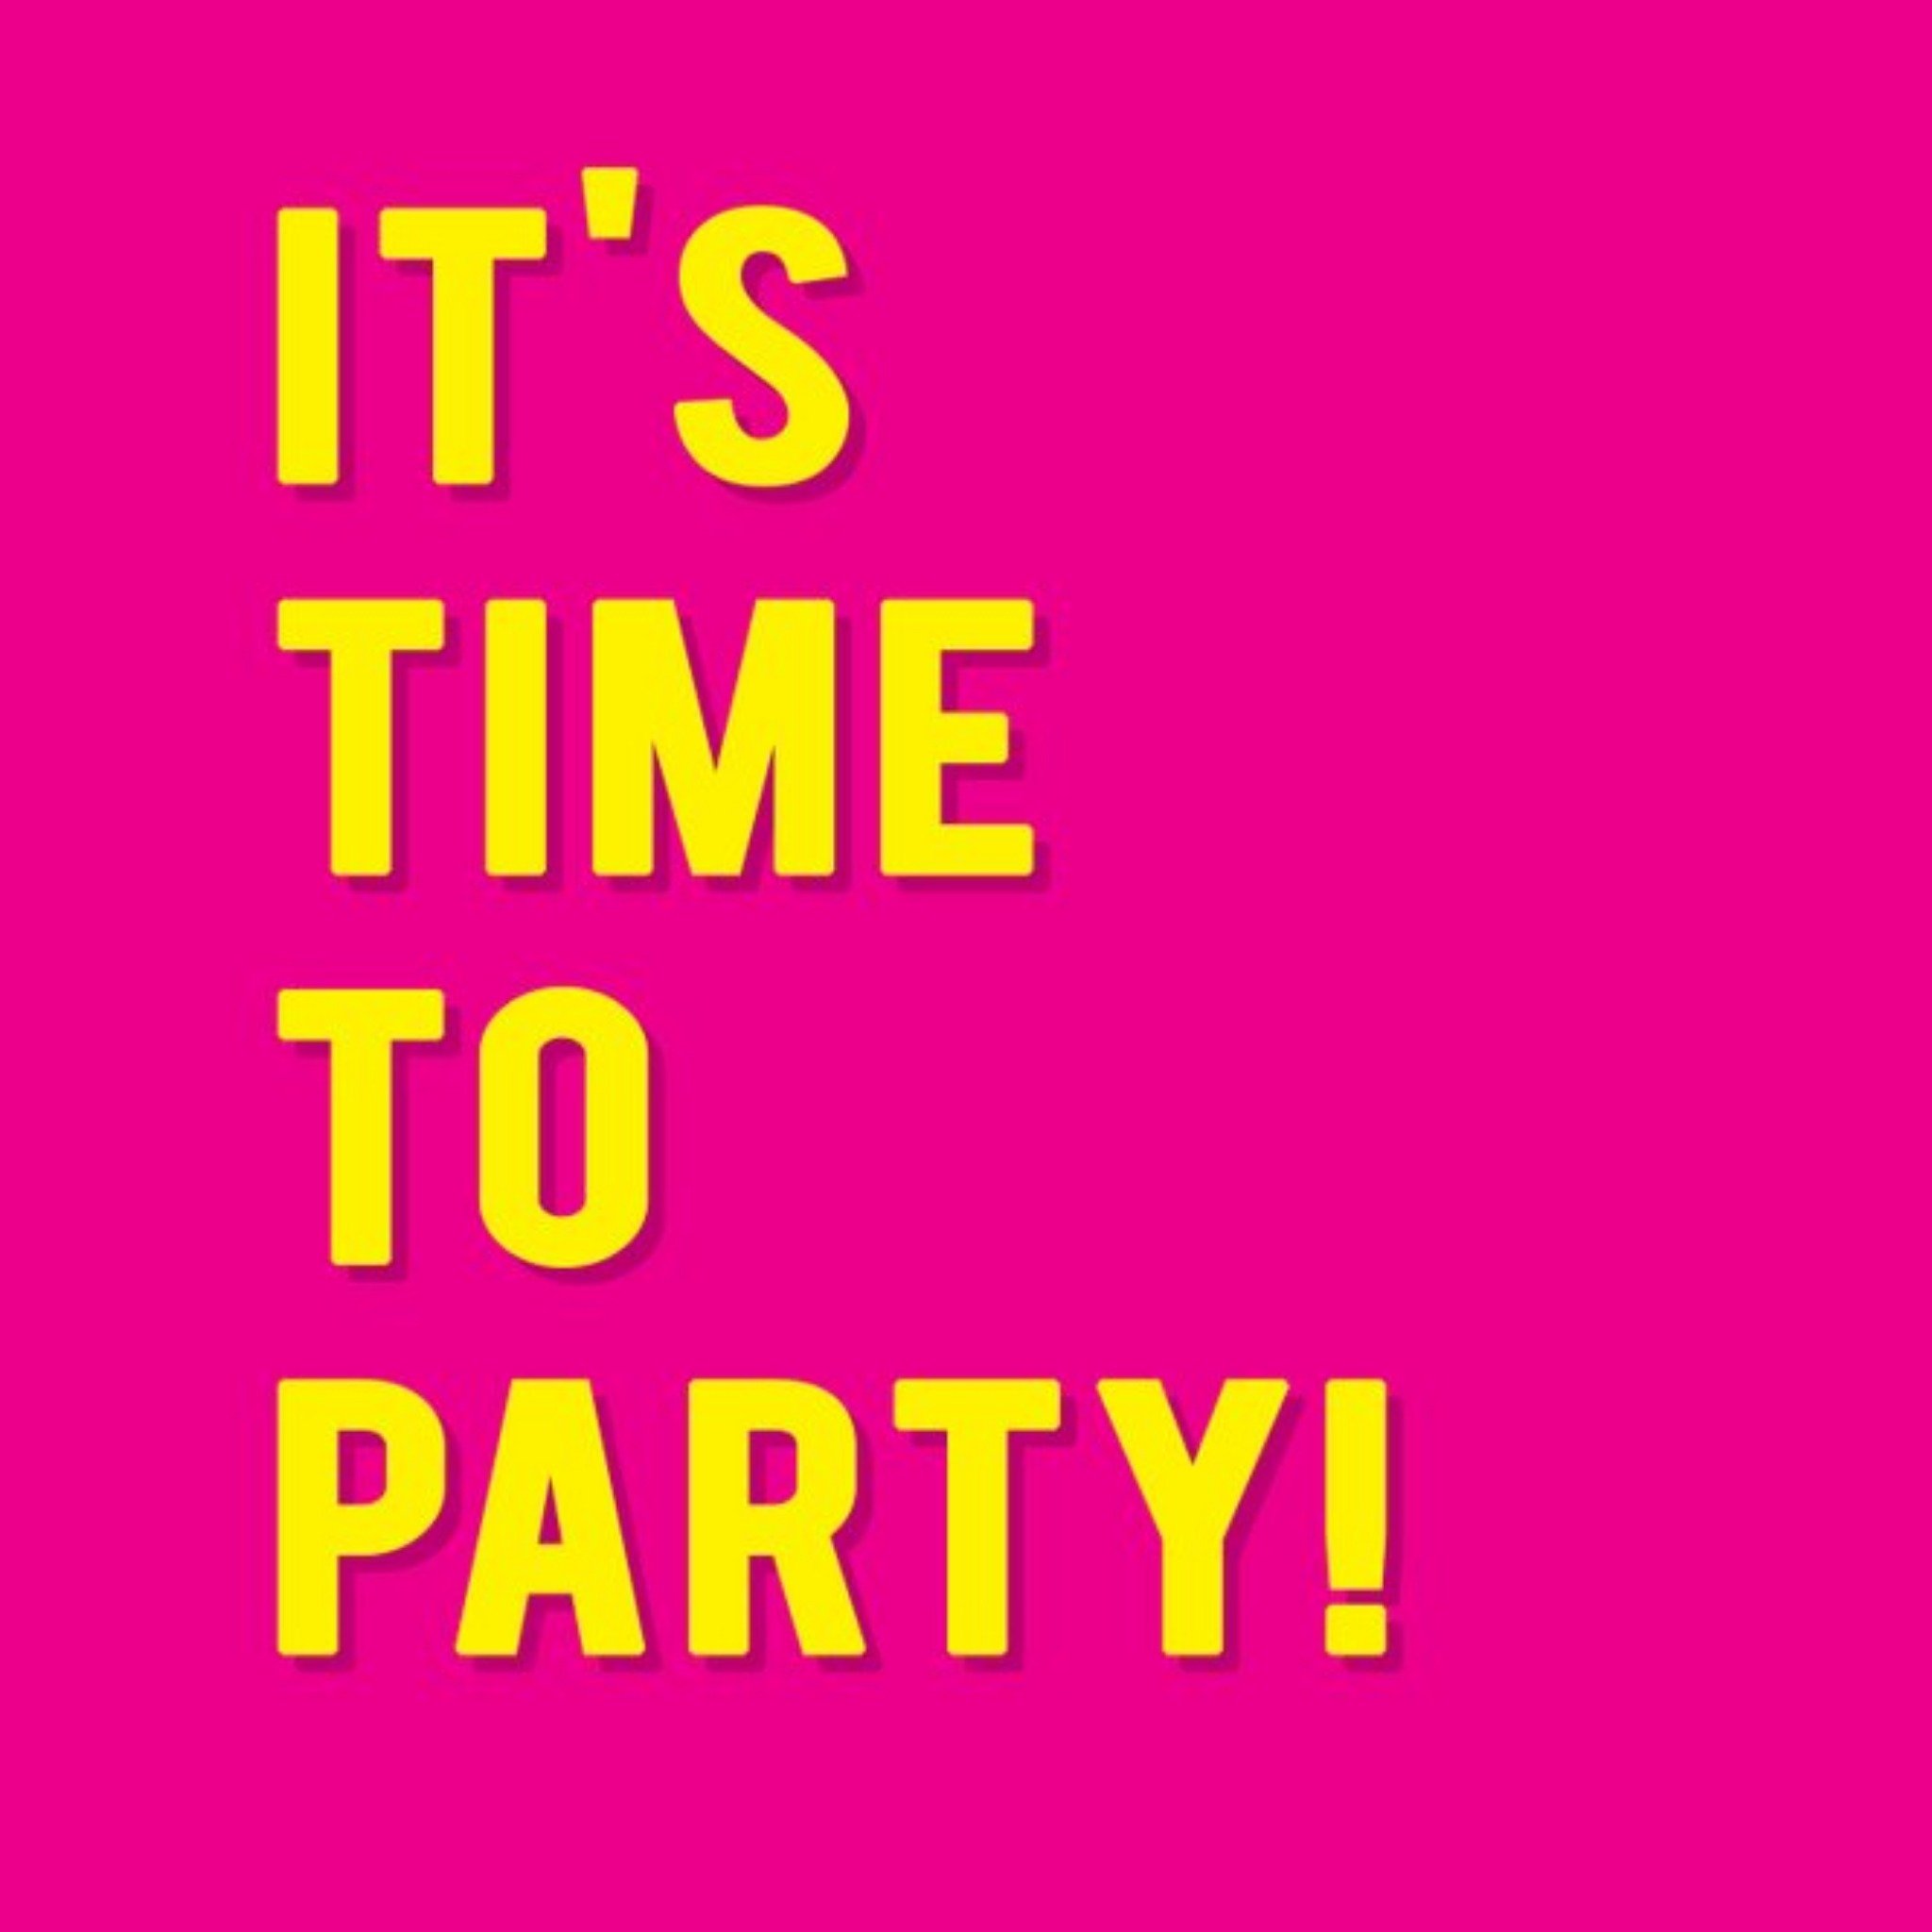 Moonpig Modern Typographical Its Time To Party Card, Square